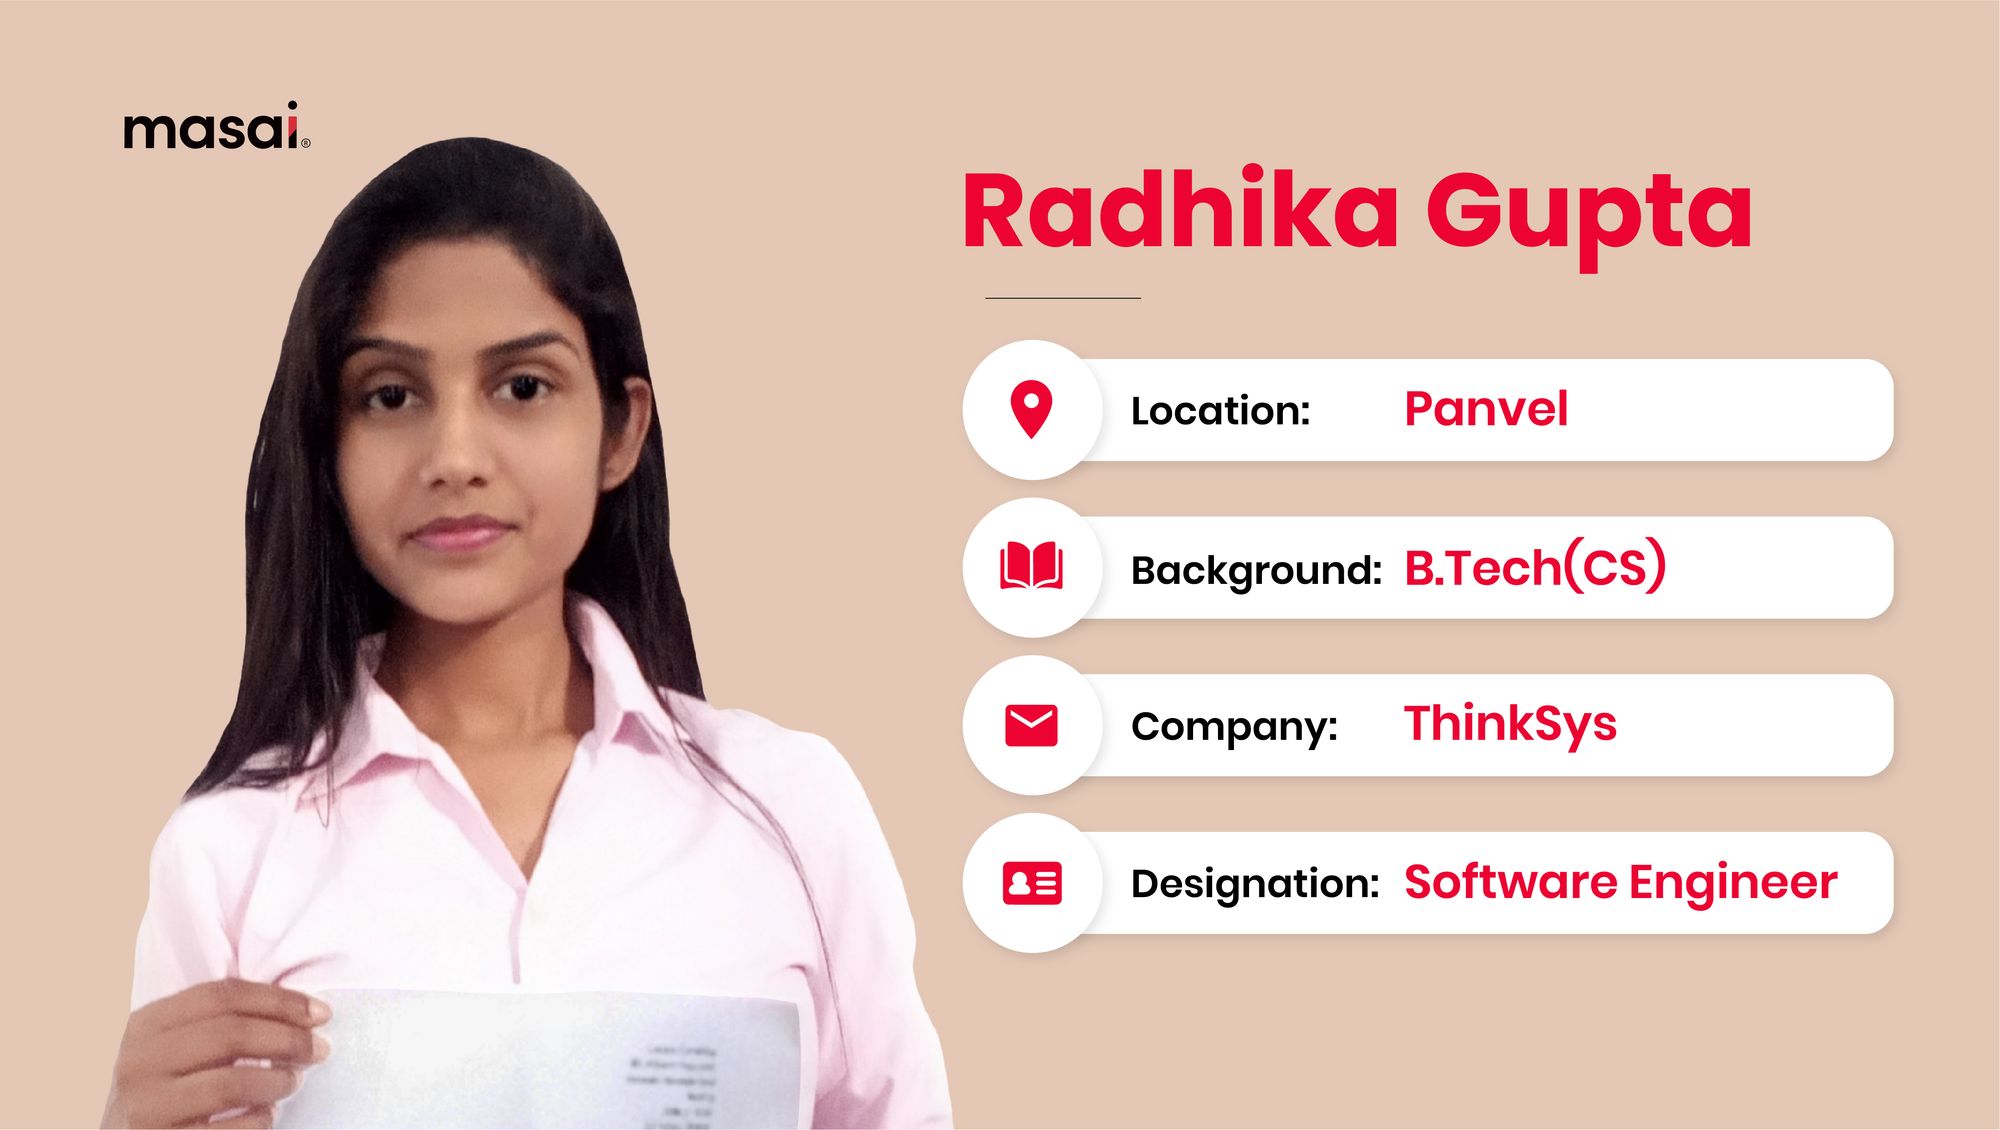 Radhika went from earning 7k a month to 5 figures, thanks to Masai.